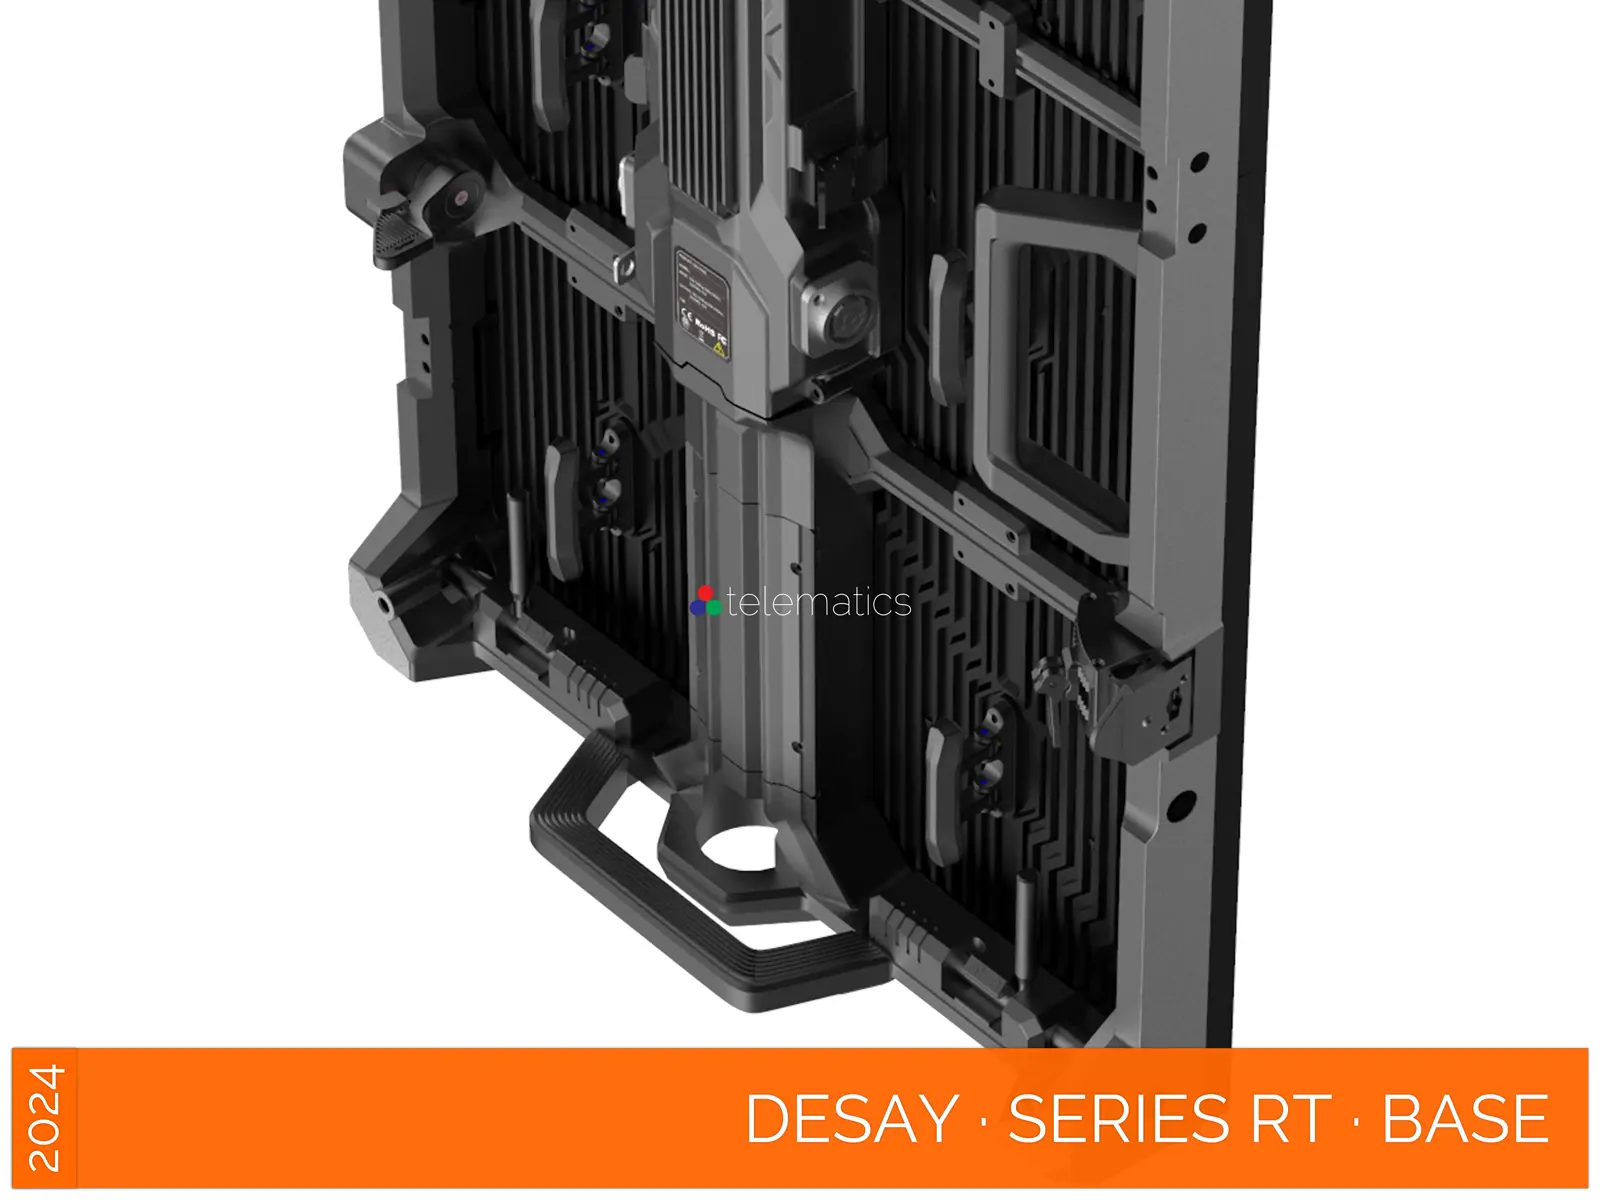 Desay · Series RT · Direct View LED Display Panel · Full Pixel Range · Rental Or Touring · Outdoor Rated · Rapid Service And Setup · Built-in Footer Support · NovaStar COEX MX CX · Vision Management Platform · Viplex · review · price · cost · priced from $1,790 per square meter